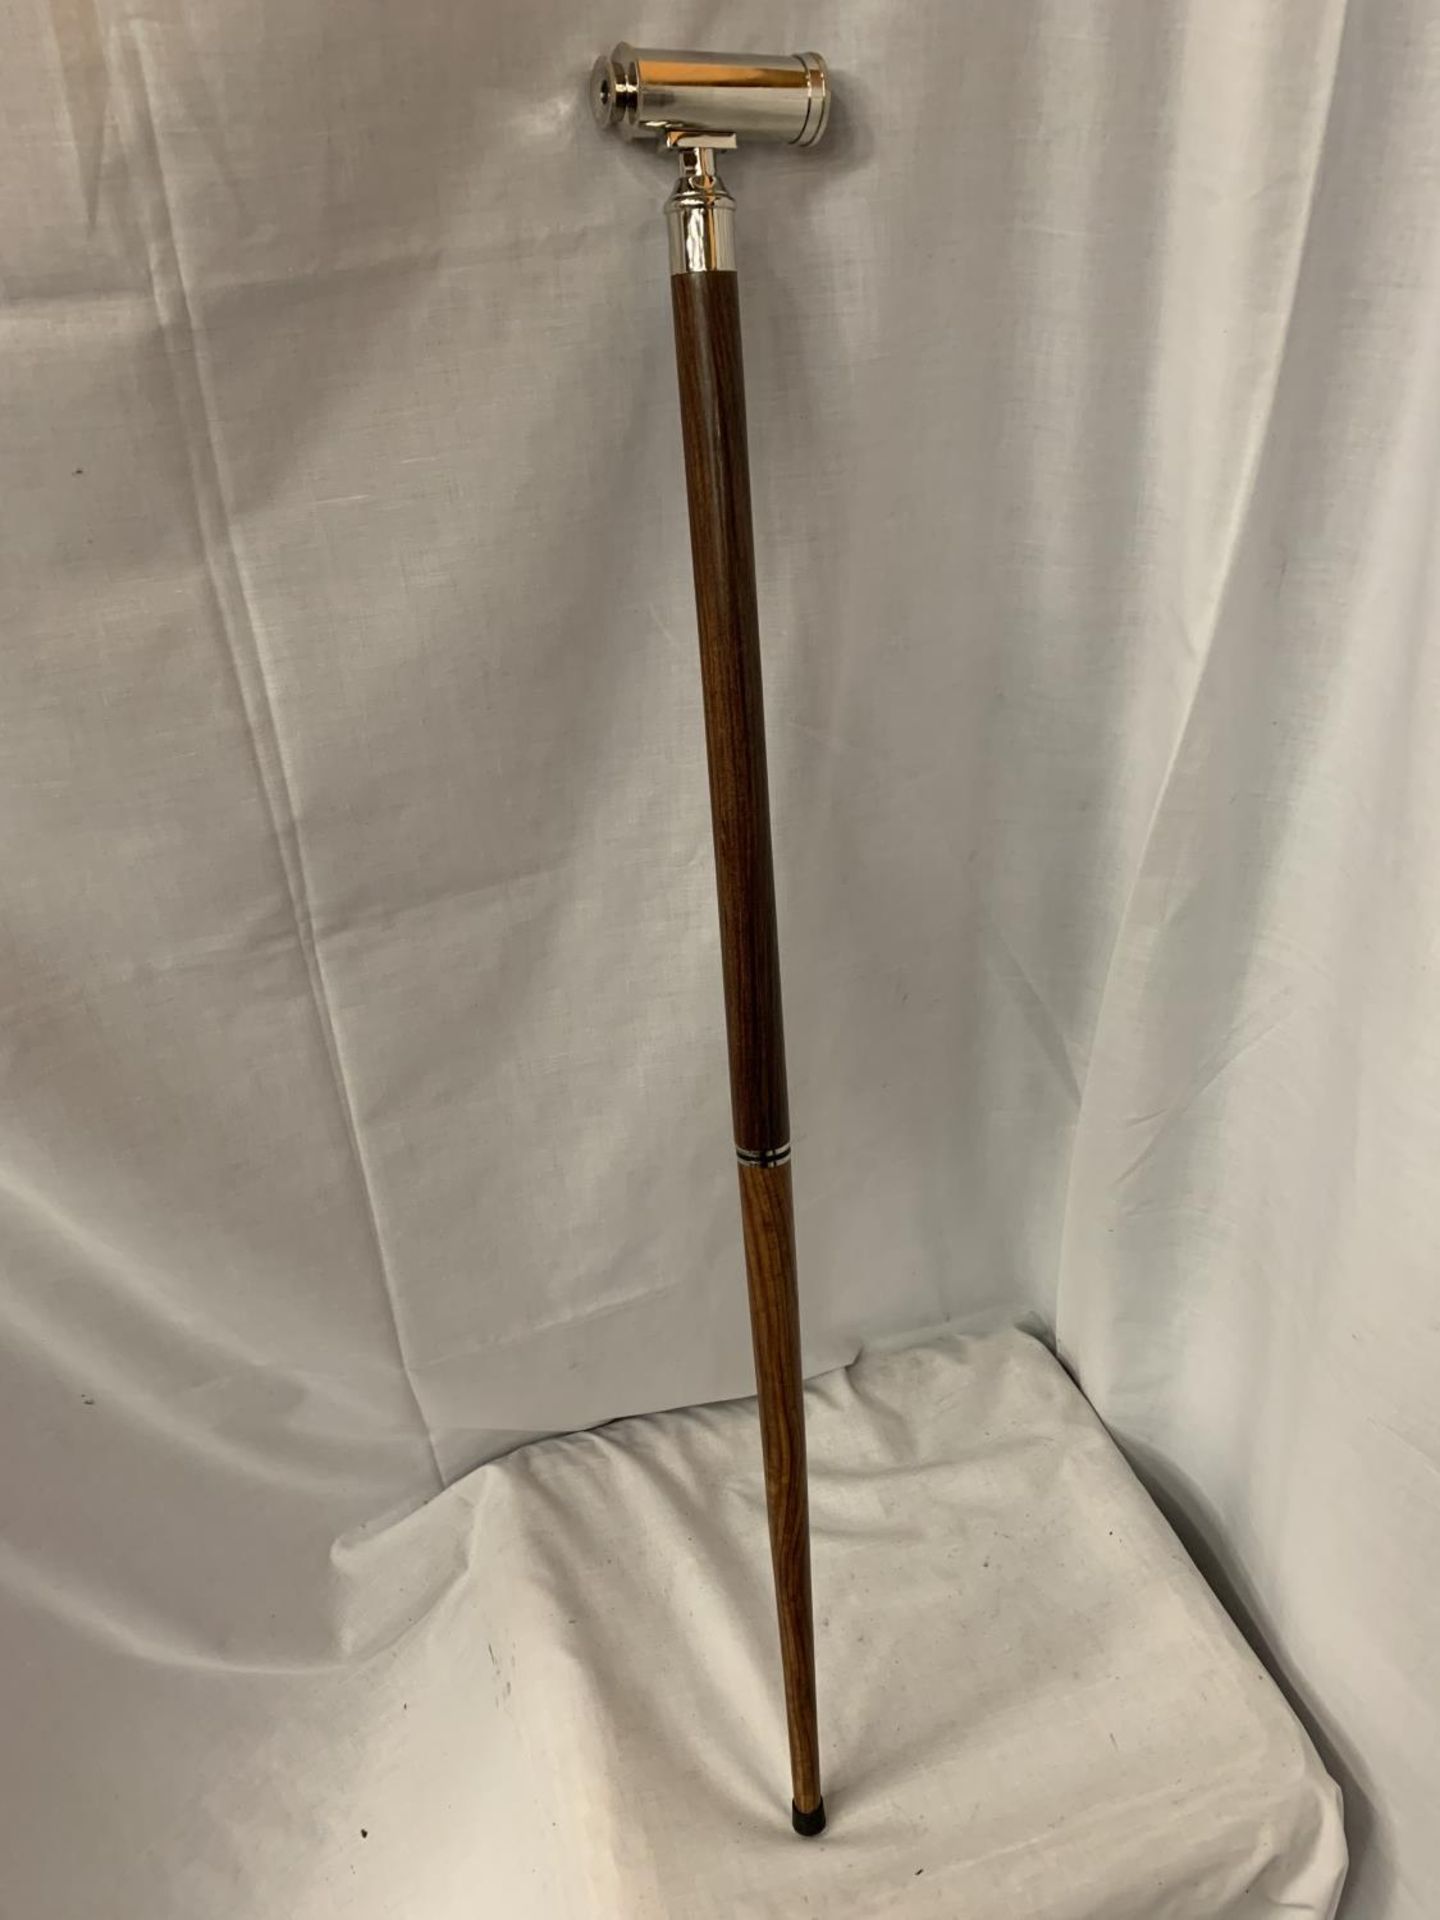 A WALKING STICK WITH A TELESCOPE HANDLE